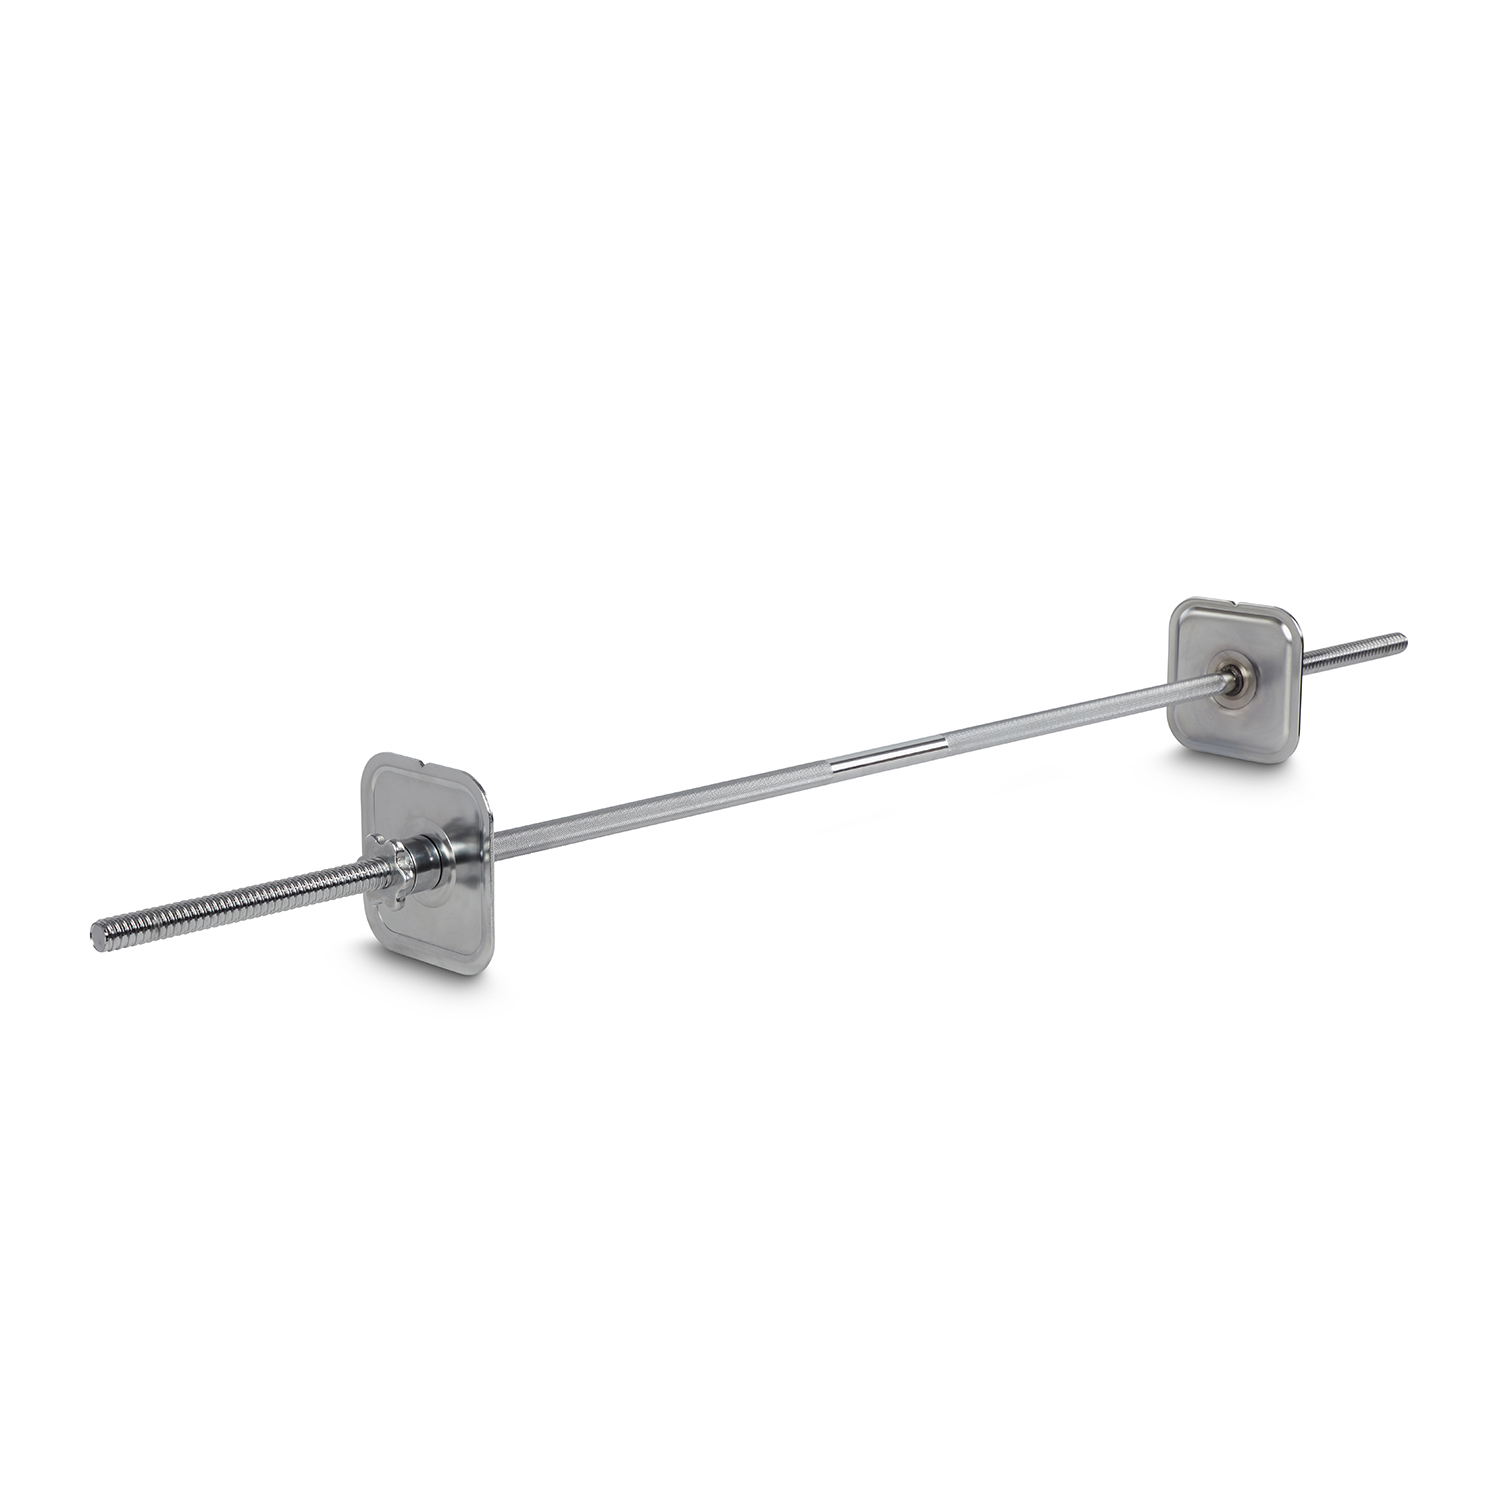 Ironmaster Straight Bar for Quick-Lock Weight Plates